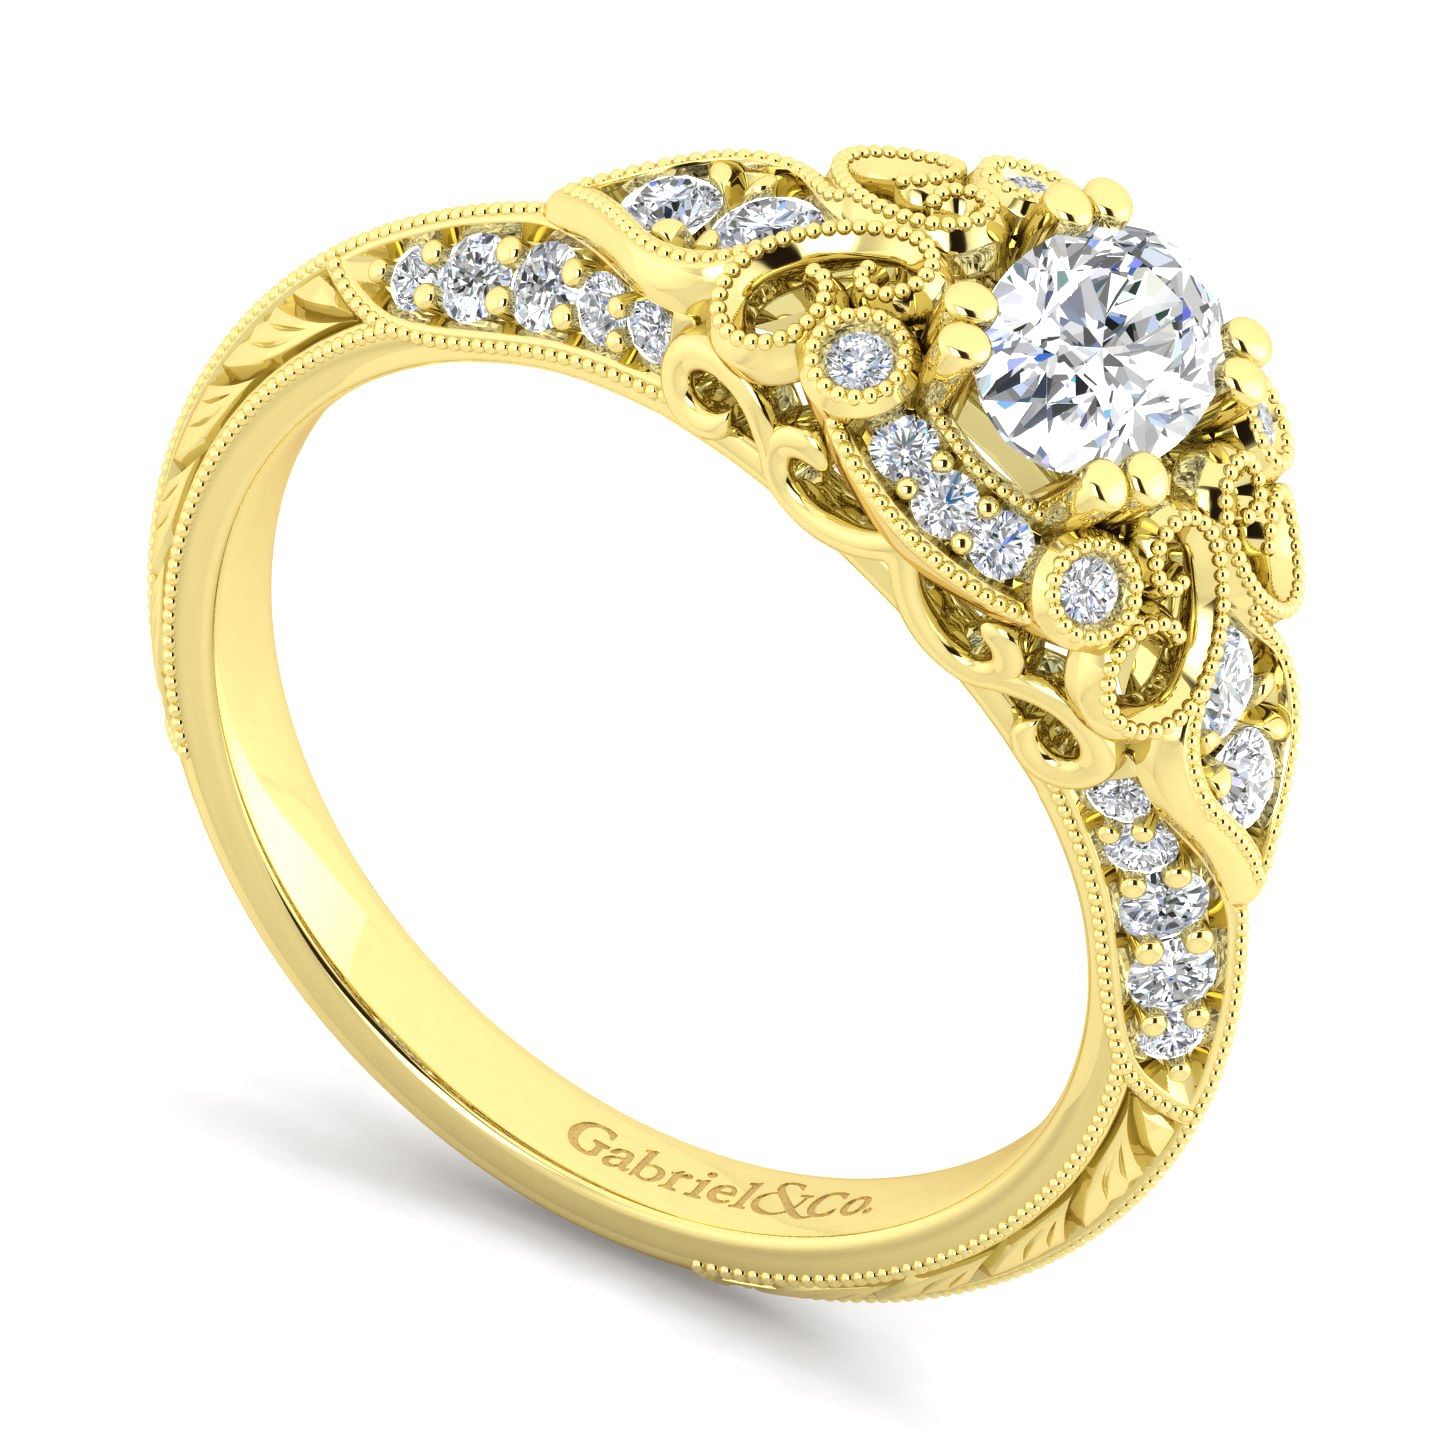 Unique 14K Yellow Gold Vintage Inspired Oval Diamond Halo Engagement Ring